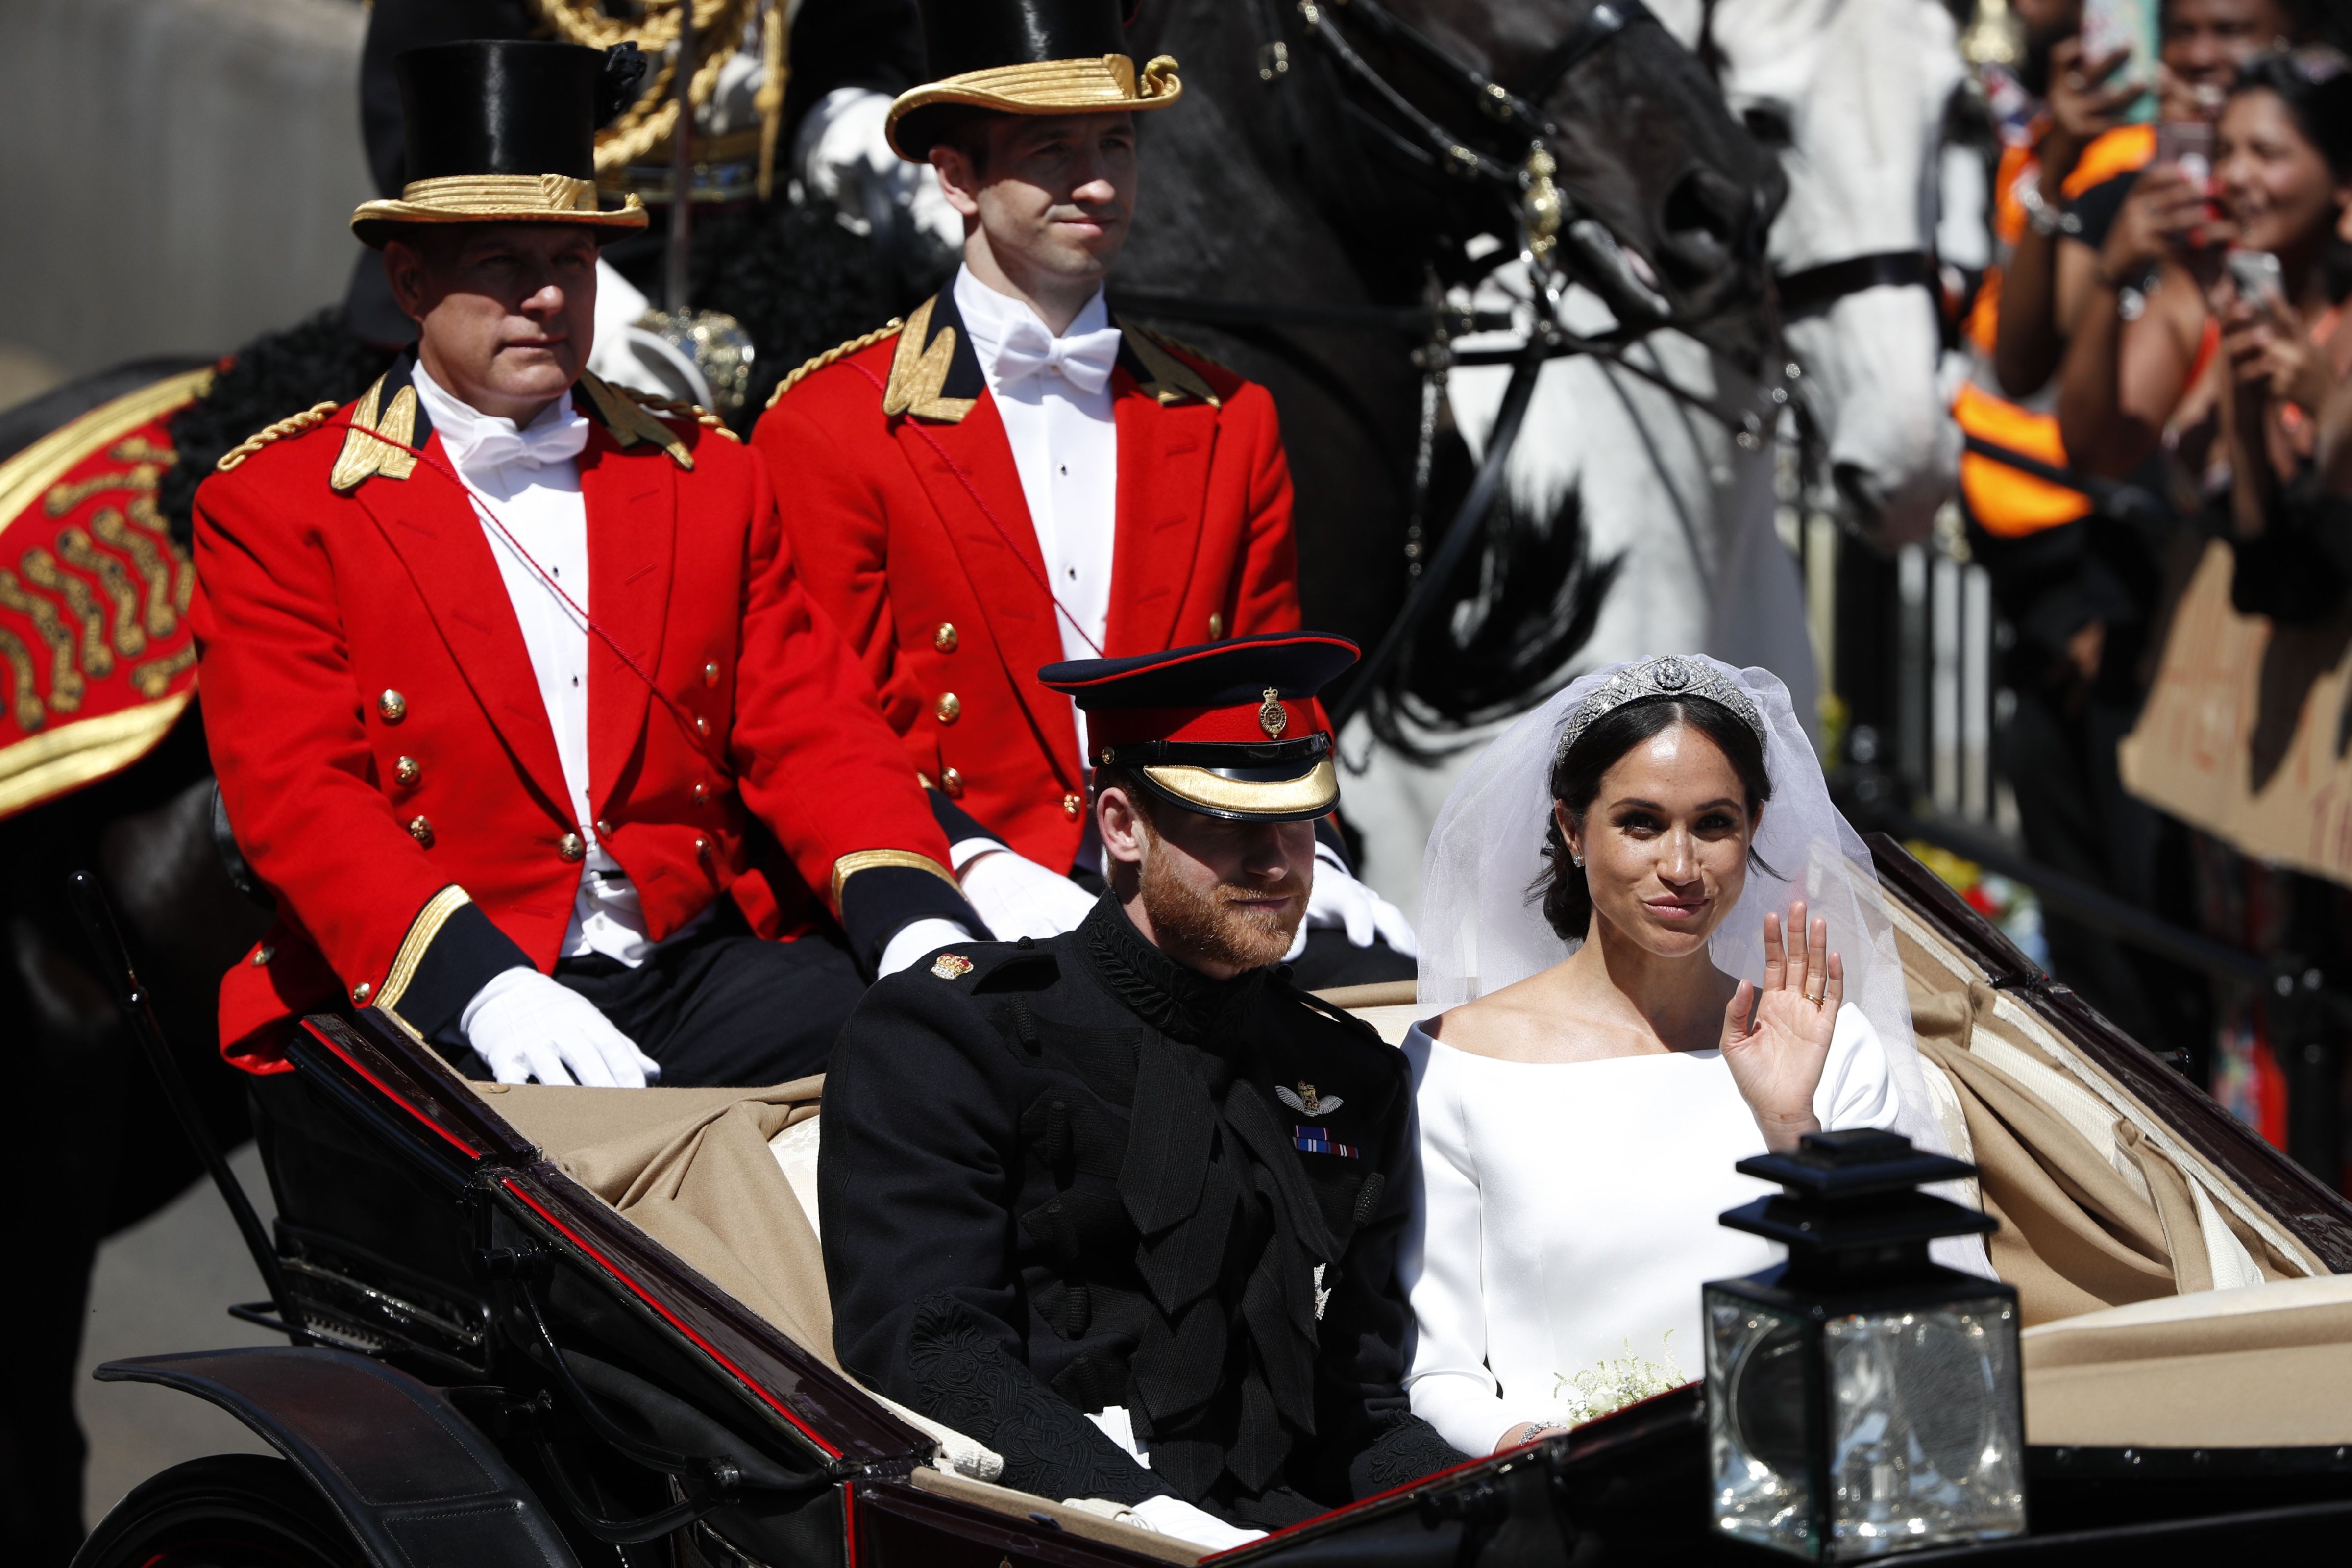 Britain's Prince Harry, Duke of Sussex and his wife Meghan, Duchess of Sussex wave from the Ascot Landau Carriage during their carriage procession on the High Street in Windsor, on May 19, 2018 after their wedding ceremony. (ADRIAN DENNIS—AFP/Getty Images)